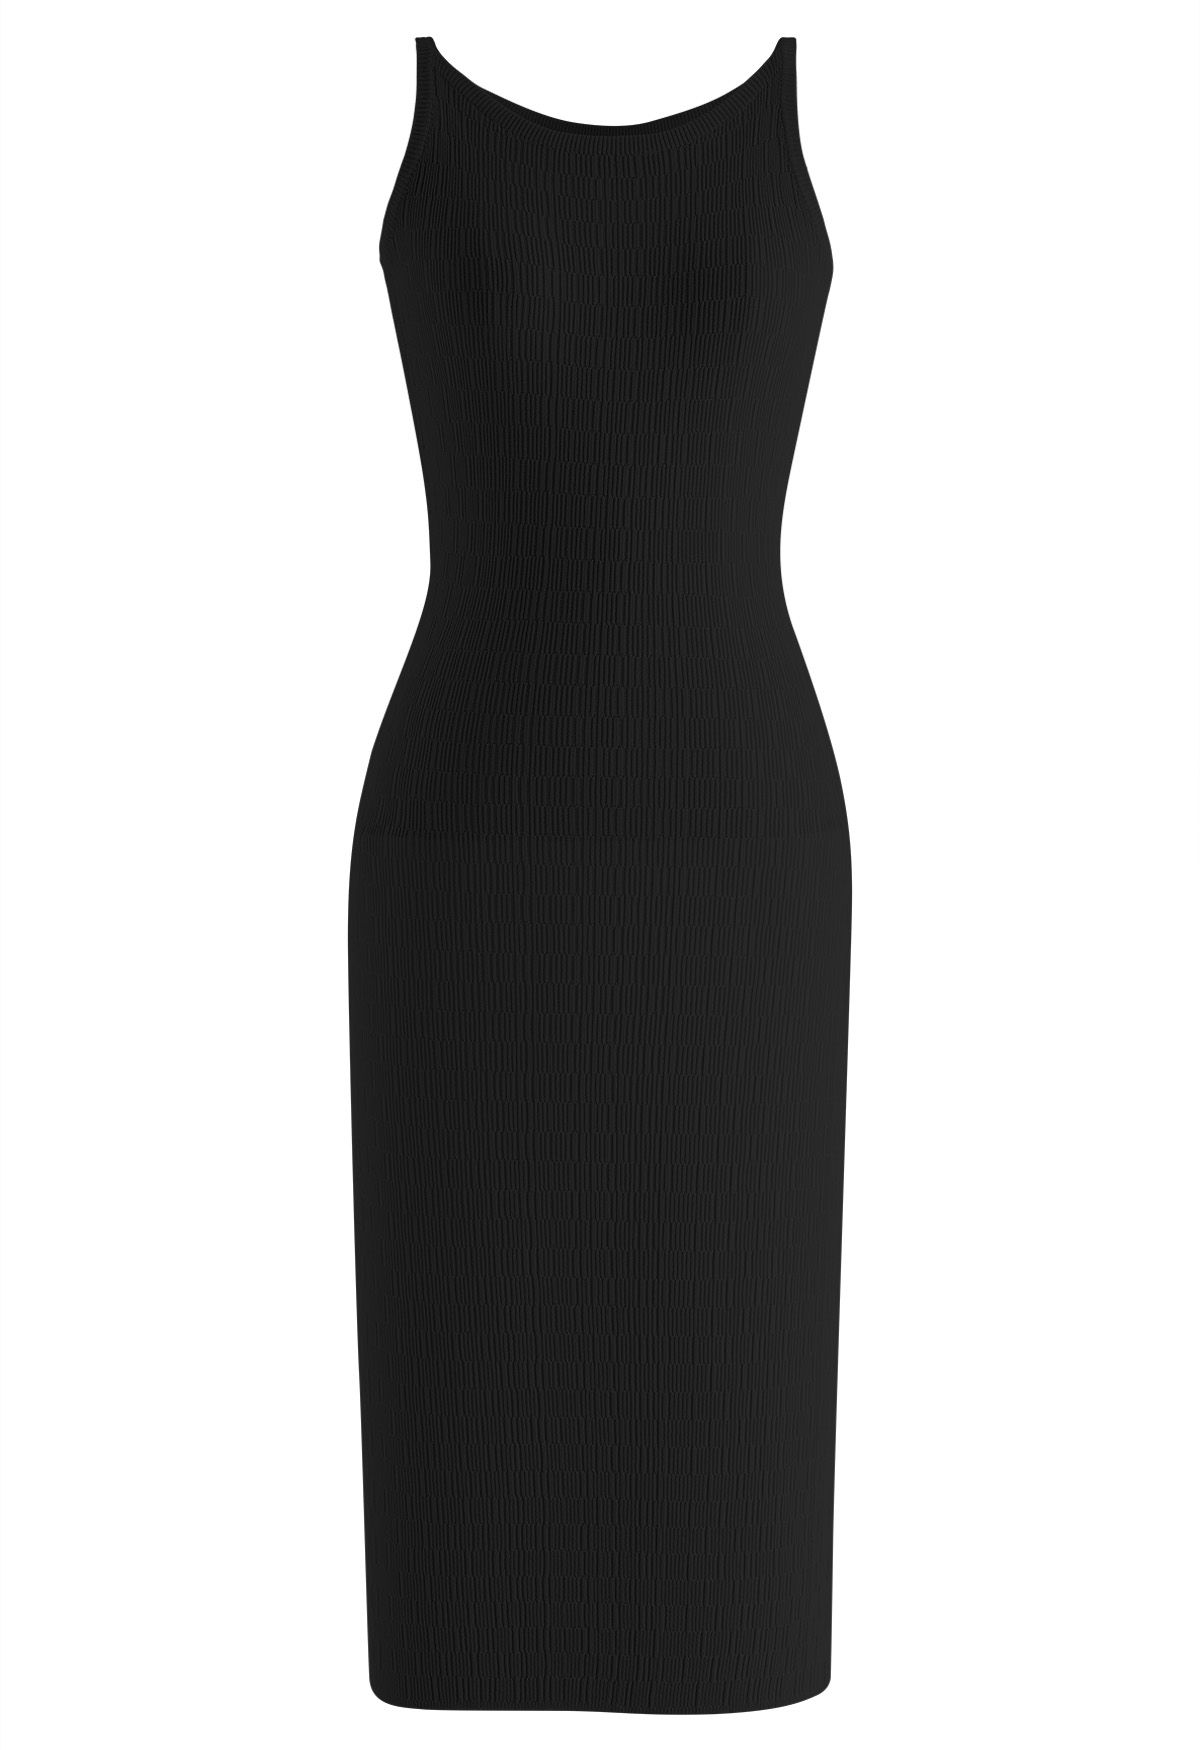 Solid Color Textured Knit Cami Dress in Black